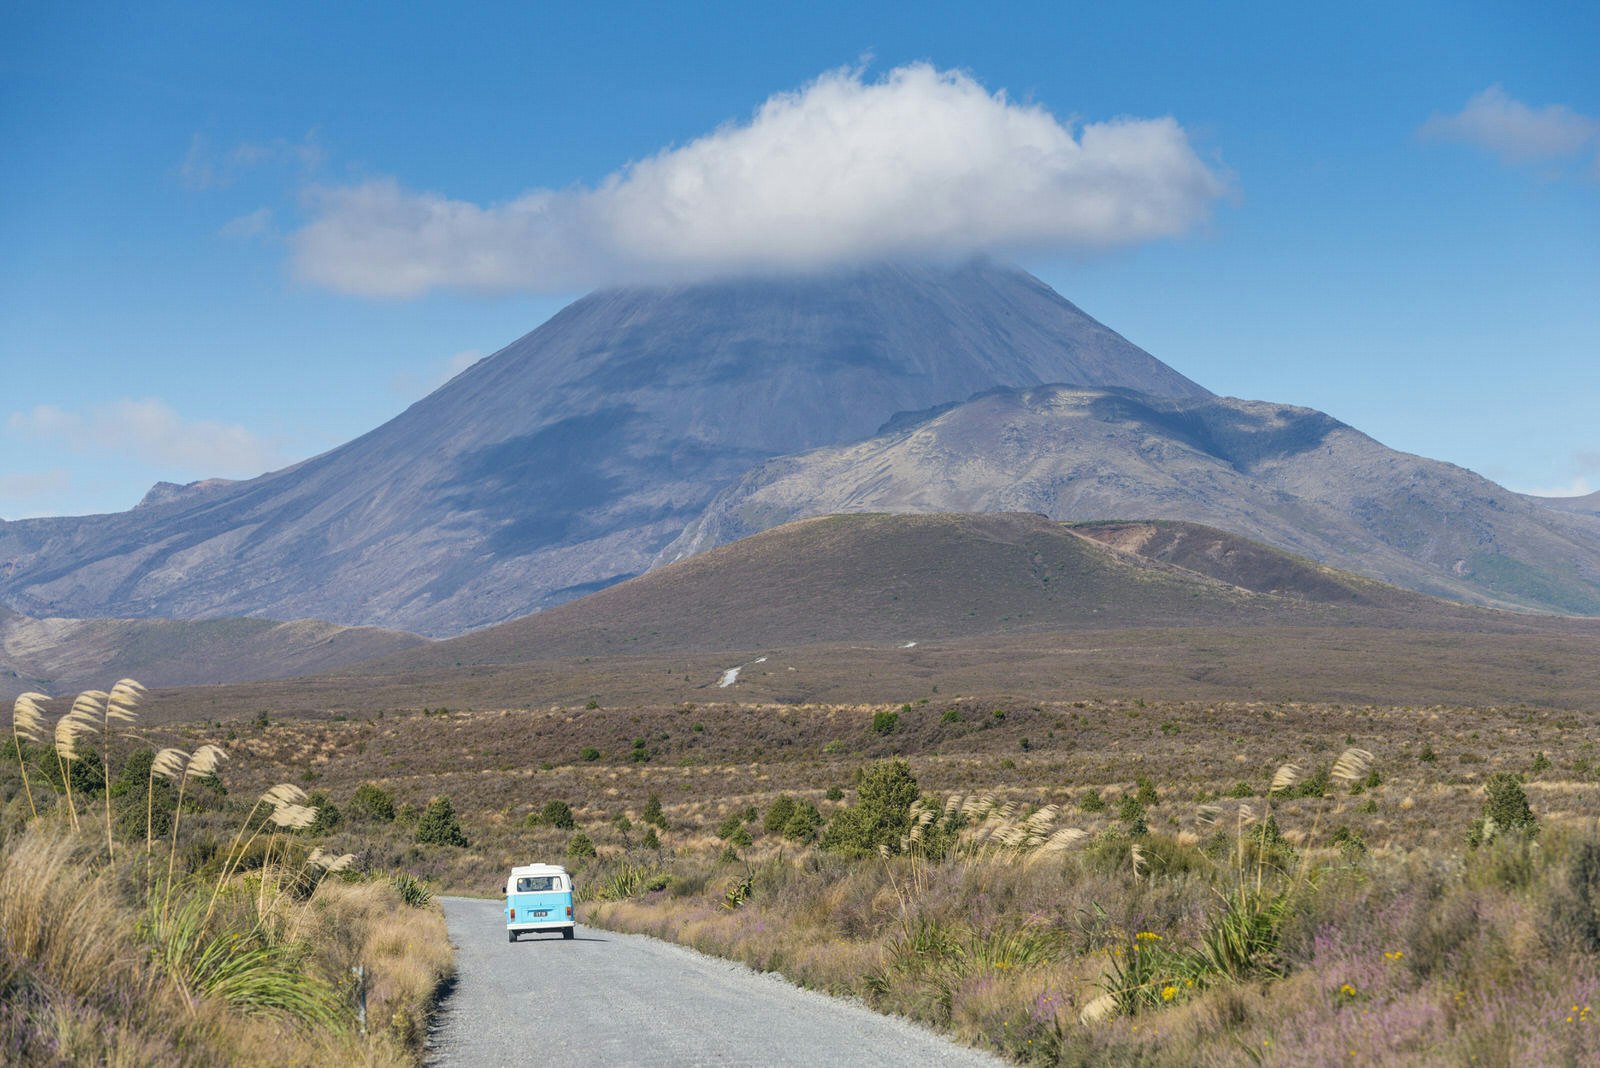 Campervan on road in Tongariro National Park, with volcanic peak (with its rocky summit cloaked in a petite cloud, in background). Free campsites and having all your baby's gear at hand in a campervan makes New Zealand a great destination for travel with your baby.